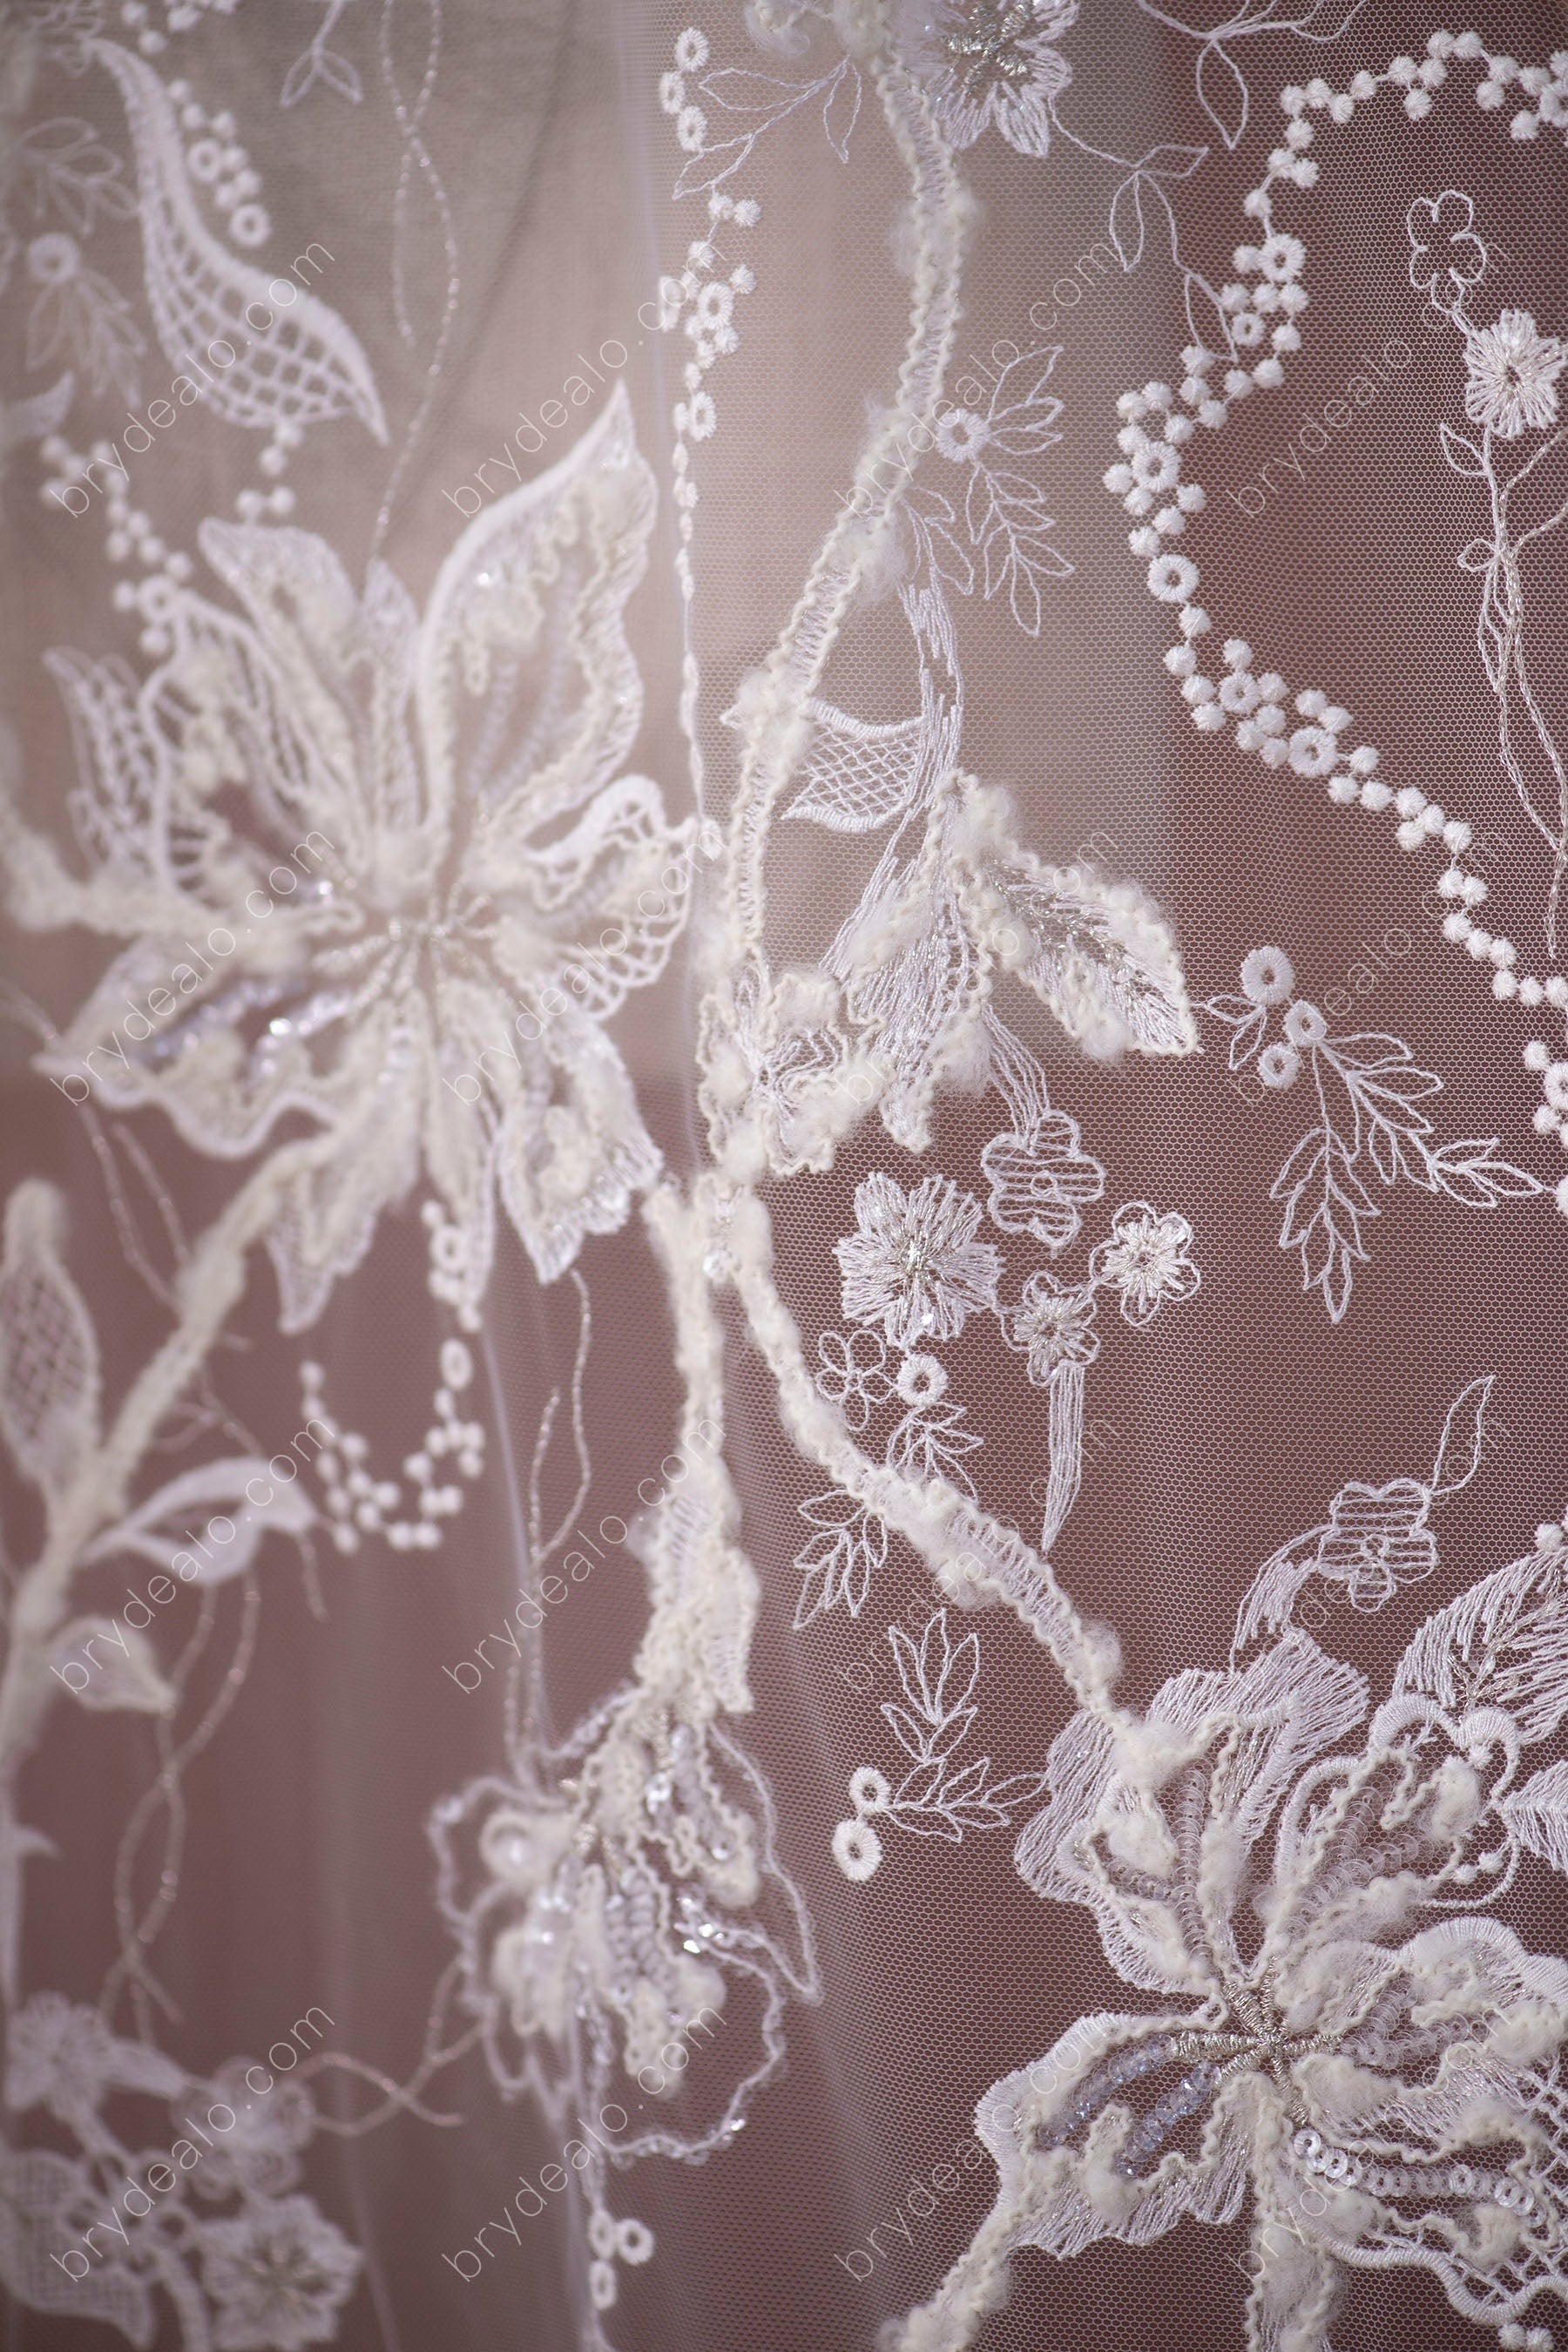 Sequin Flower Embroidery Lace Fabric Online